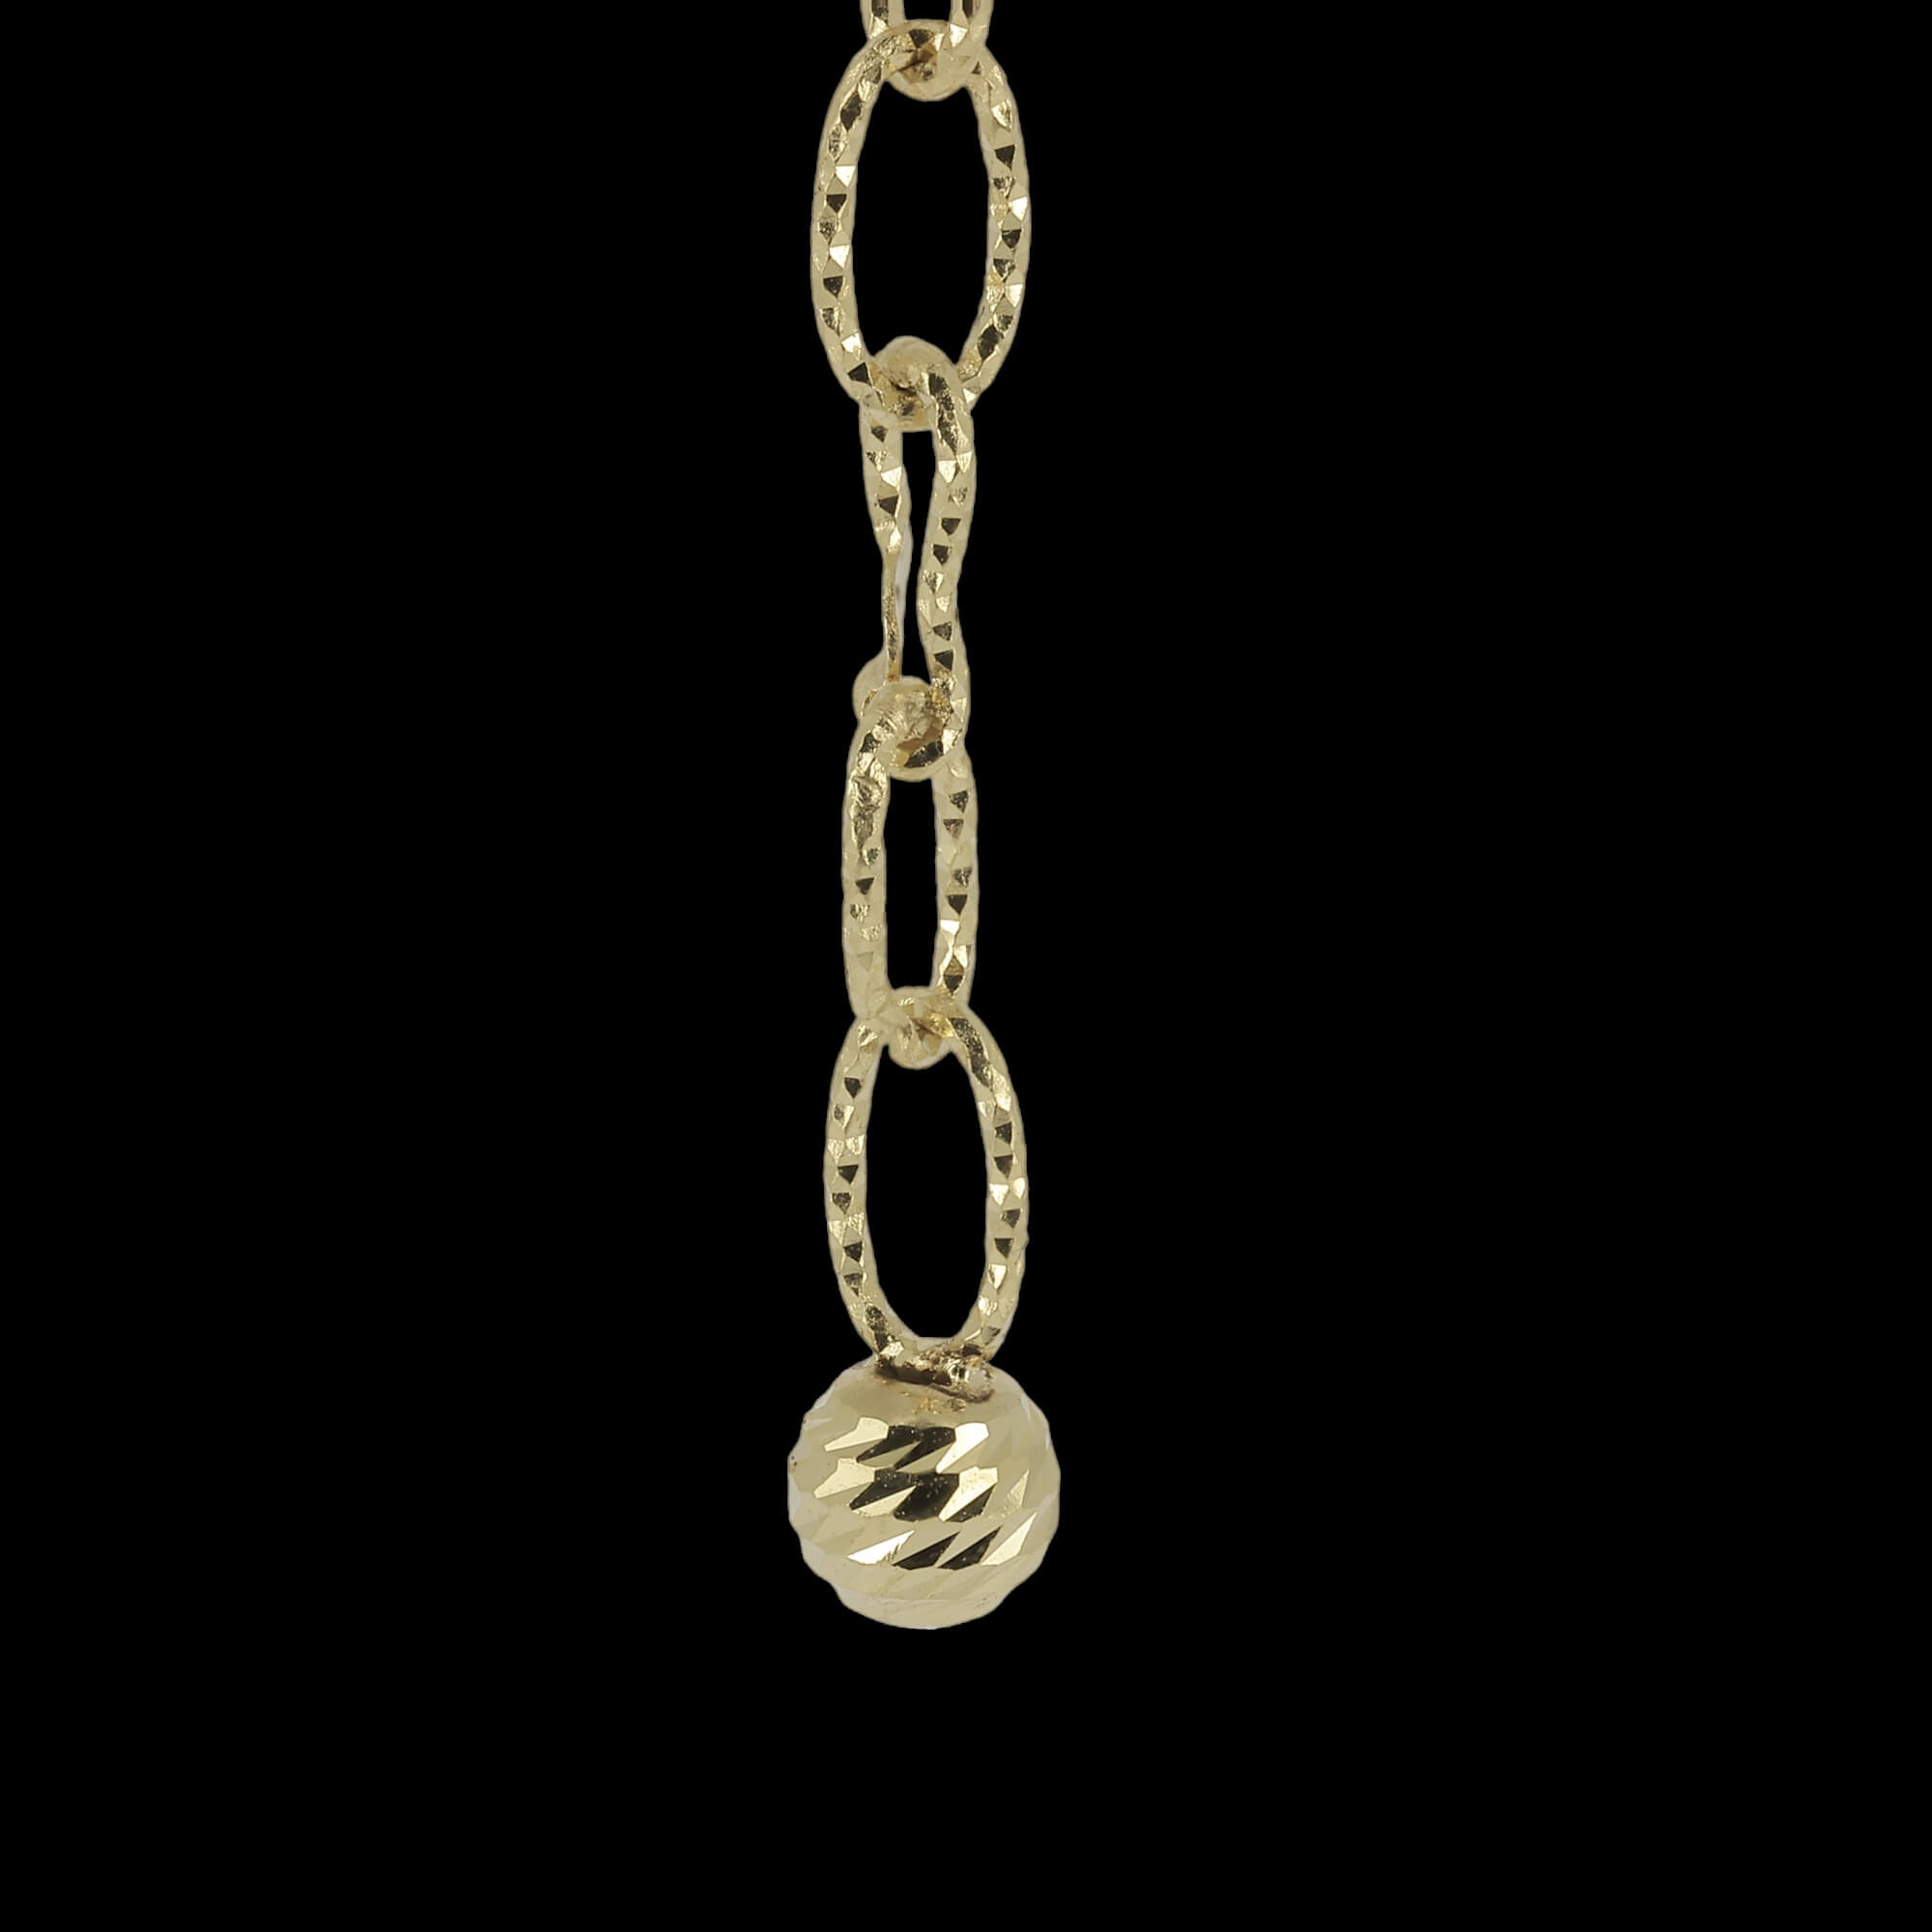 Golden necklace of 18kt gold with an edited pendant